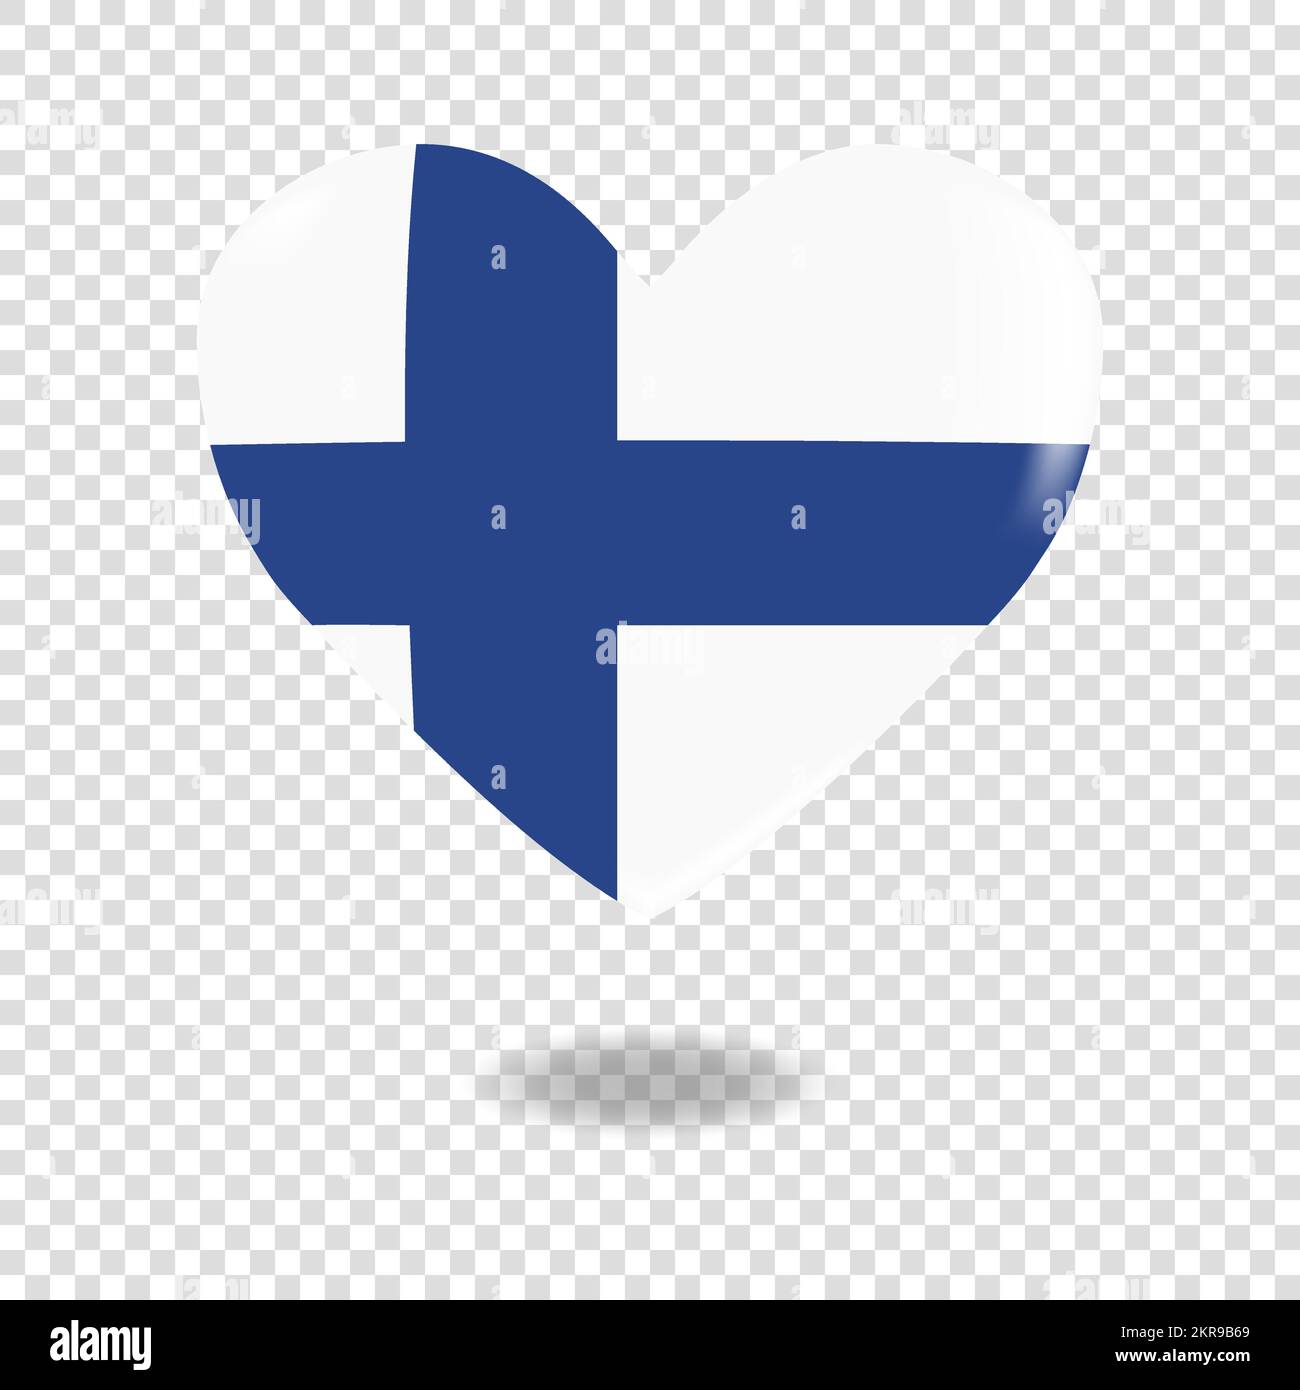 Volumetric heart of Finland on checkered background denoting transparency, vector image Stock Vector